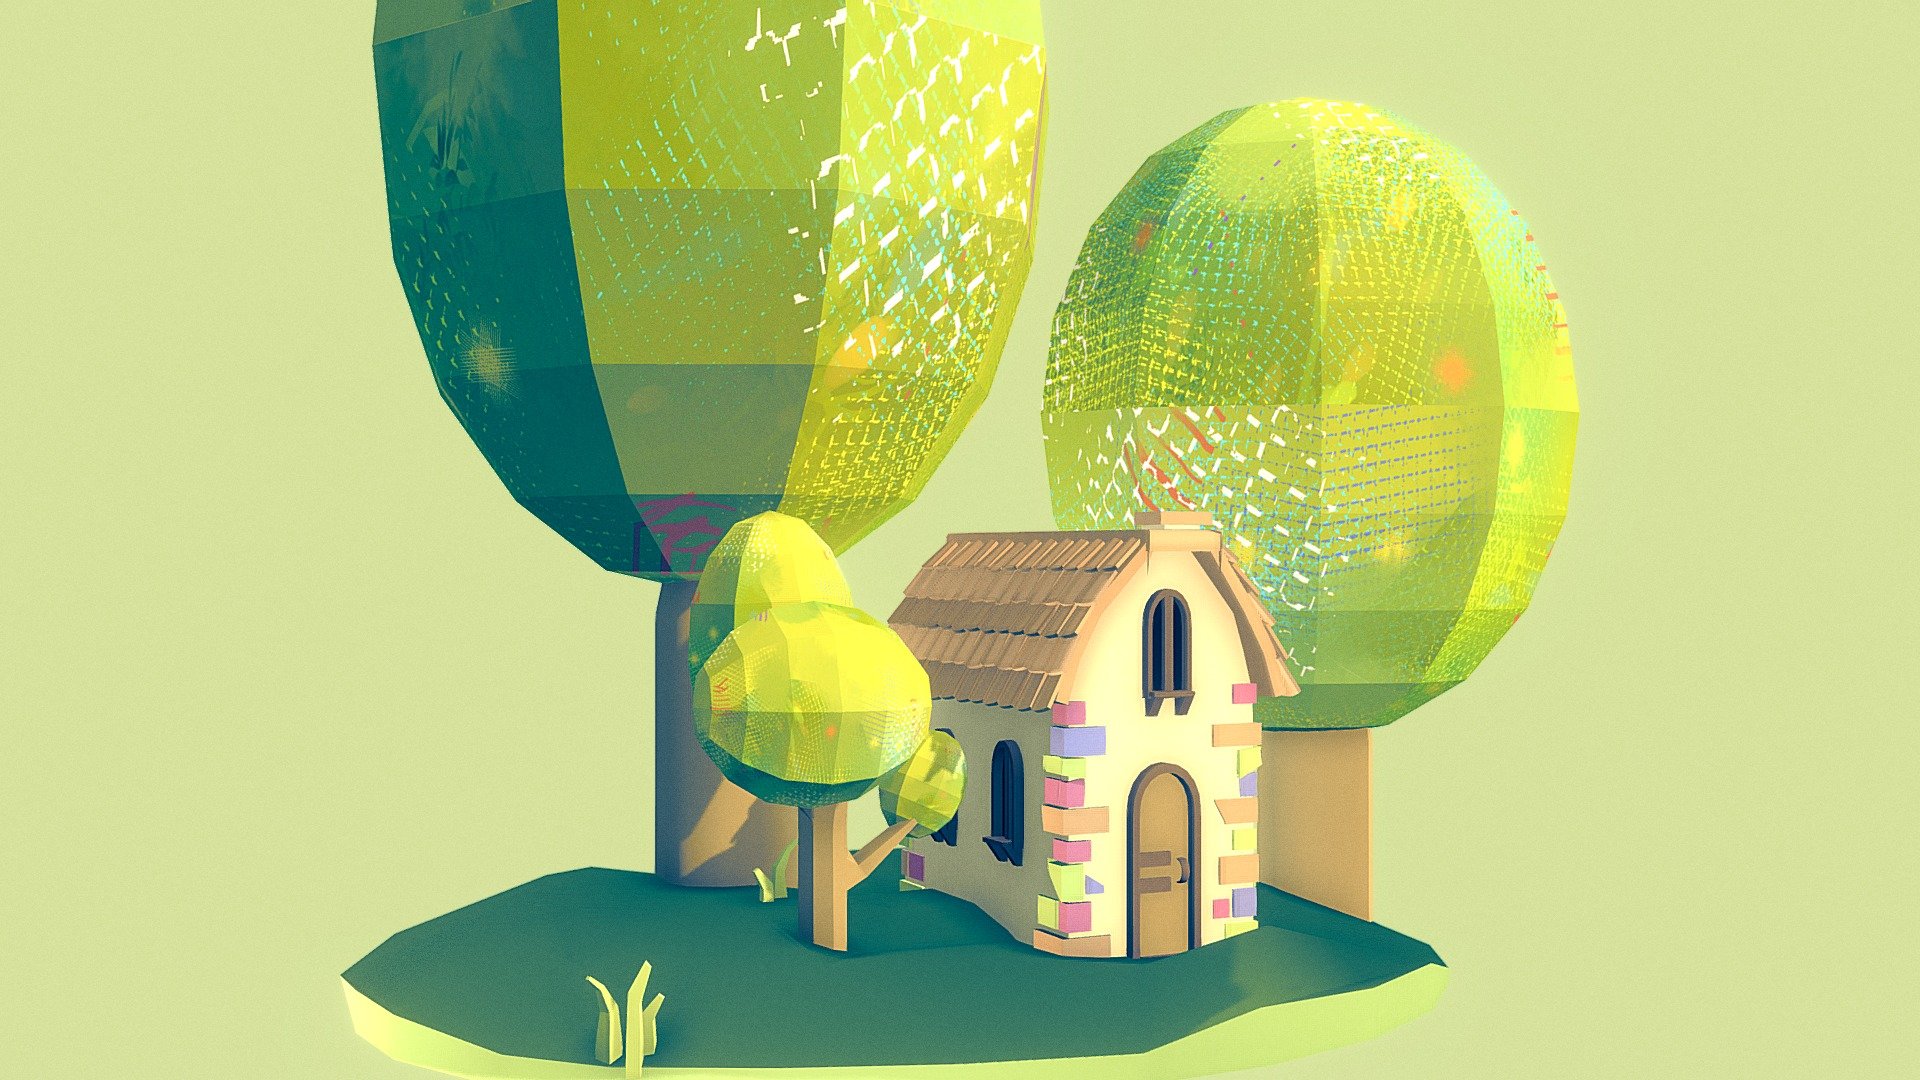 Here goes my first model then ! Its a little cartoonish house, in a little garden so that it doesnt feel too lonely :) 

I made the ohouse following this tutorial: https://www.youtube.com/watch?v=BsVu31GTjo8&amp;t=1s - LIttle cartoon house - 3D model by hortensefrouin 3d model